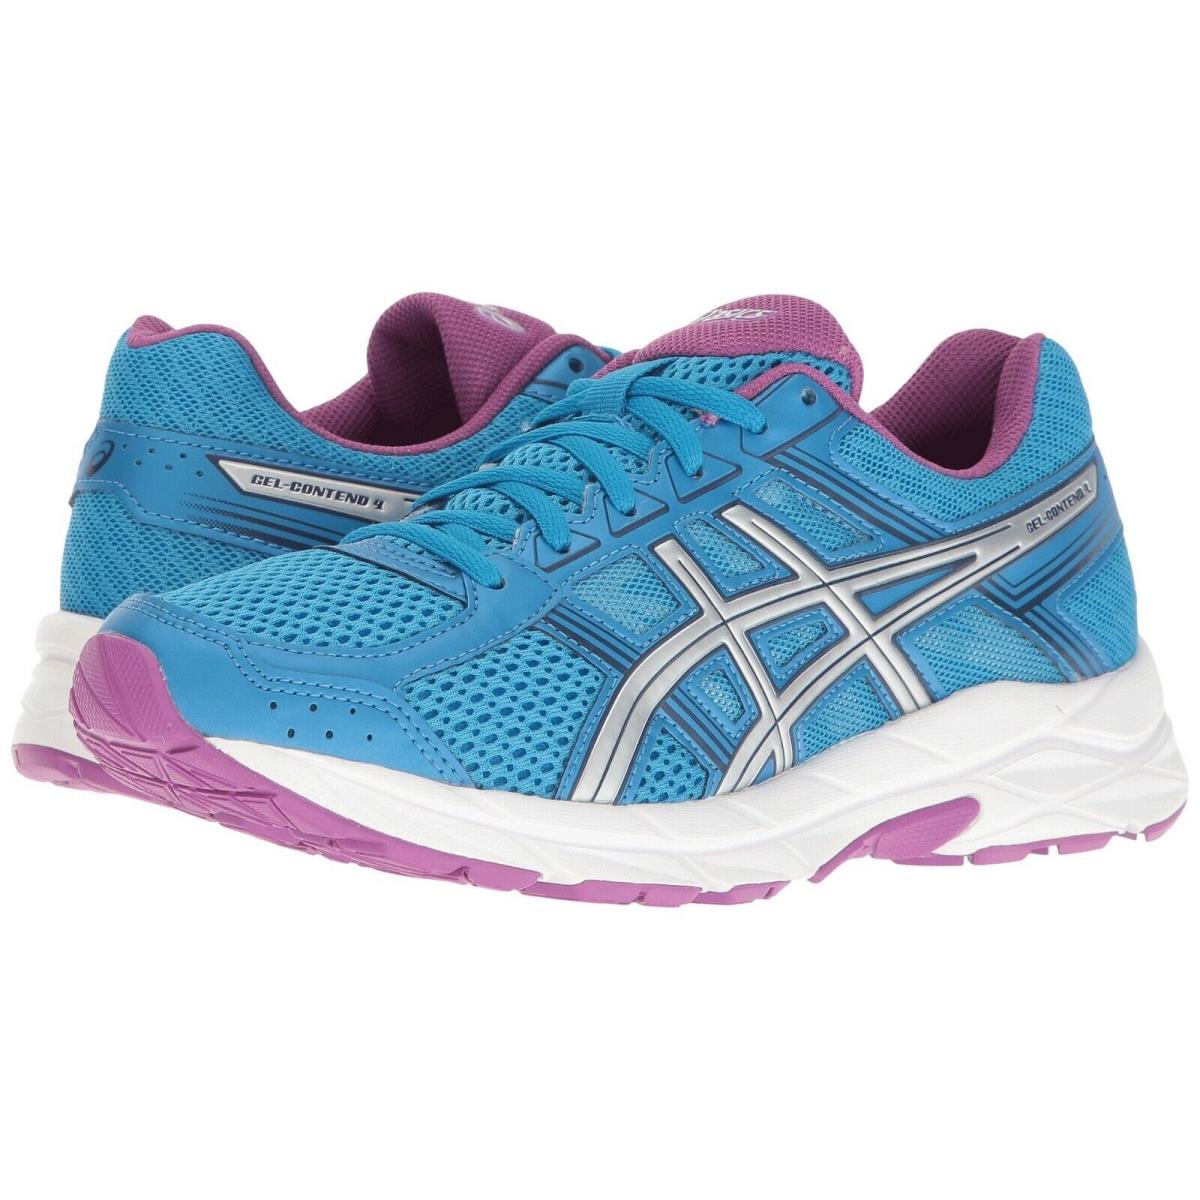 Womens Asics Contend 4 Running Shoes Sneakers - 10